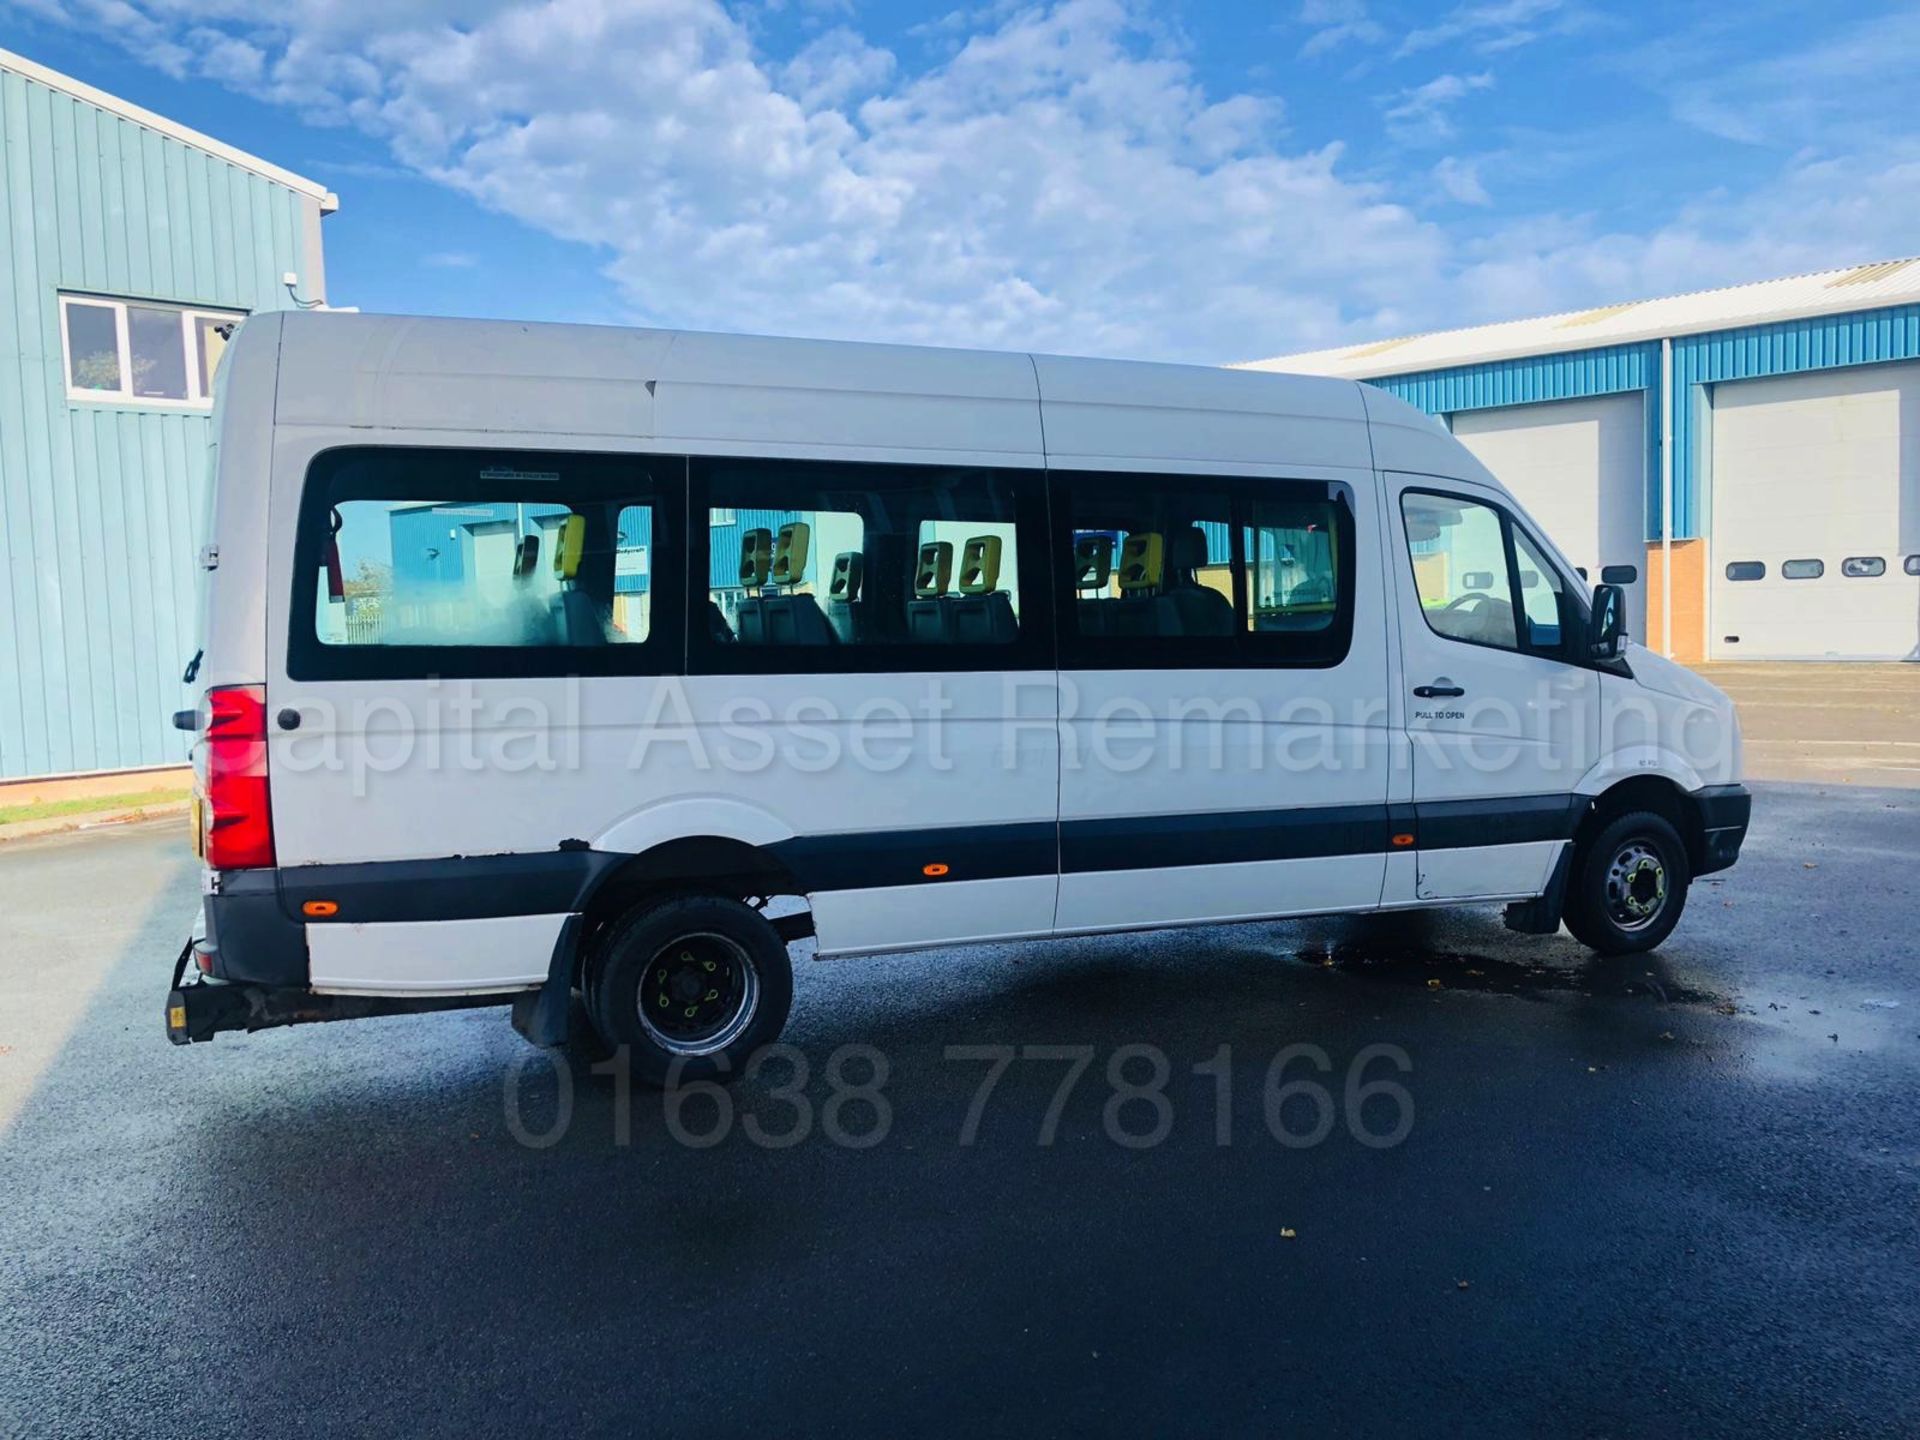 VOLKSWAGEN CRAFTER 2.5 TDI *LWB - 16 SEATER MINI-BUS / COACH* (2007) *ELECTRIC WHEEL CHAIR LIFT* - Image 10 of 38